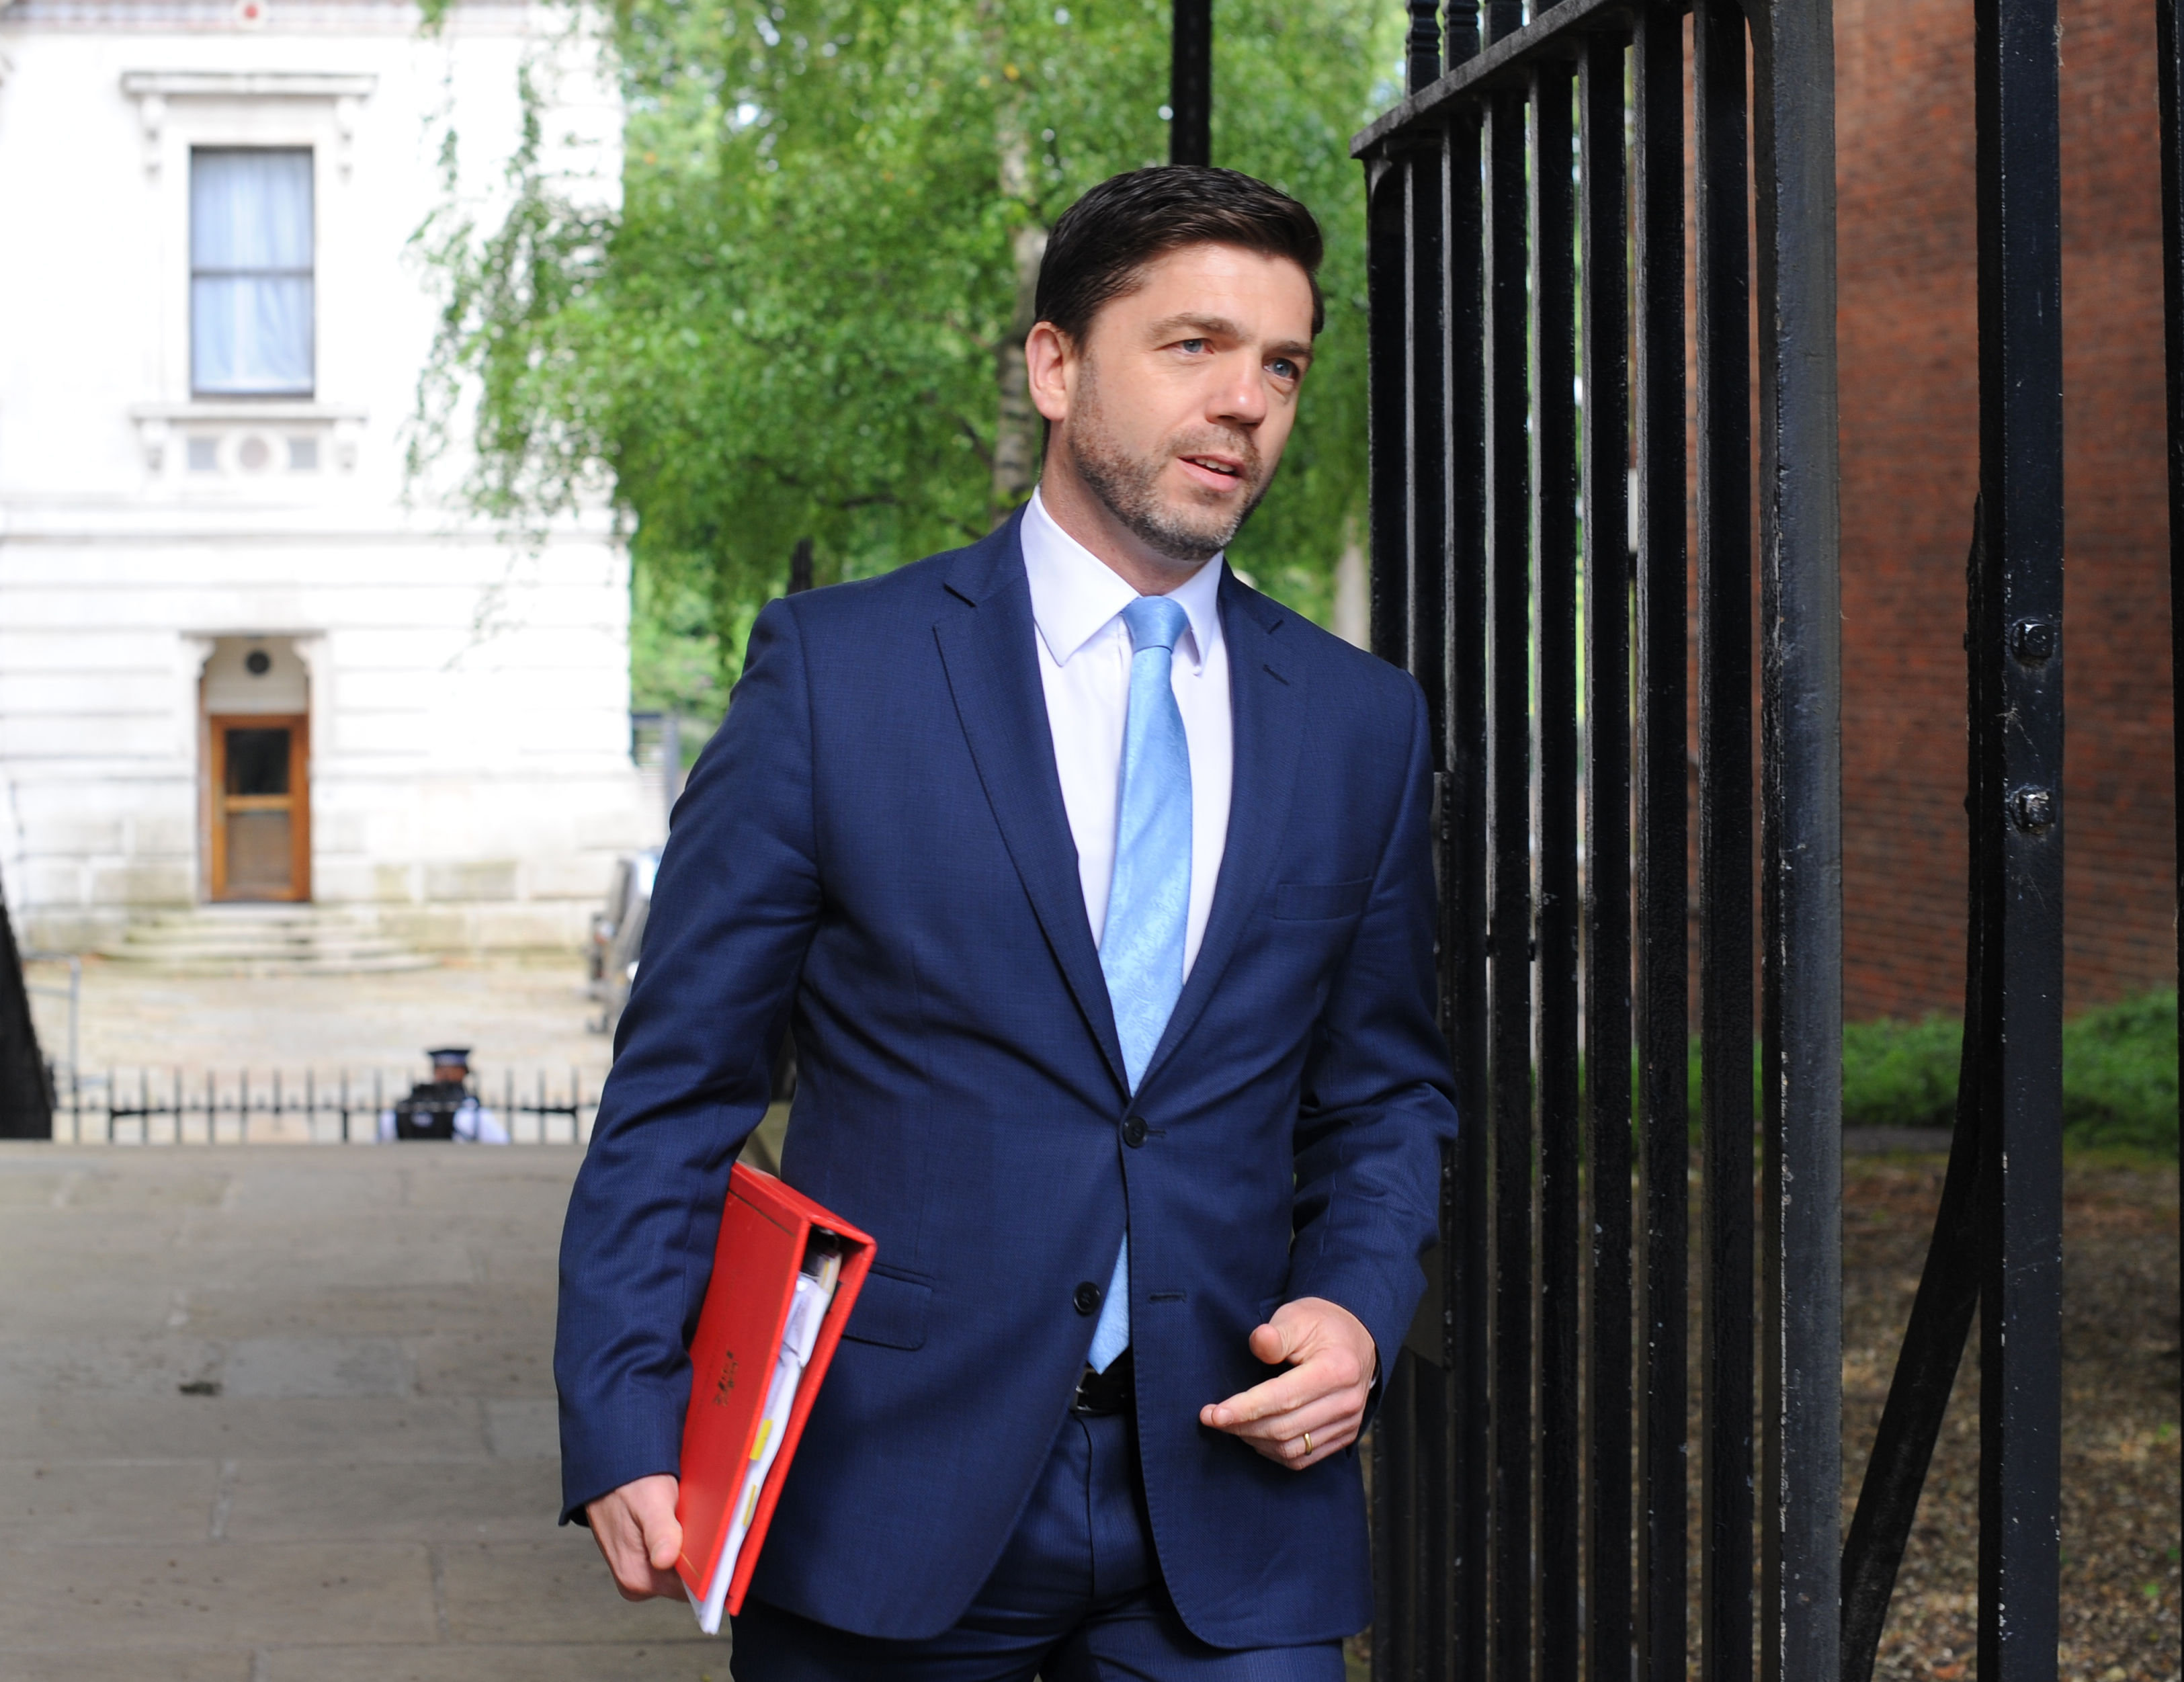 <strong>Former Conservative cabinet minister Stephen Crabb&nbsp;was reported to have admitted sending 'explicit' messages to a 19-year-old woman after a job interview at Westminster</strong>